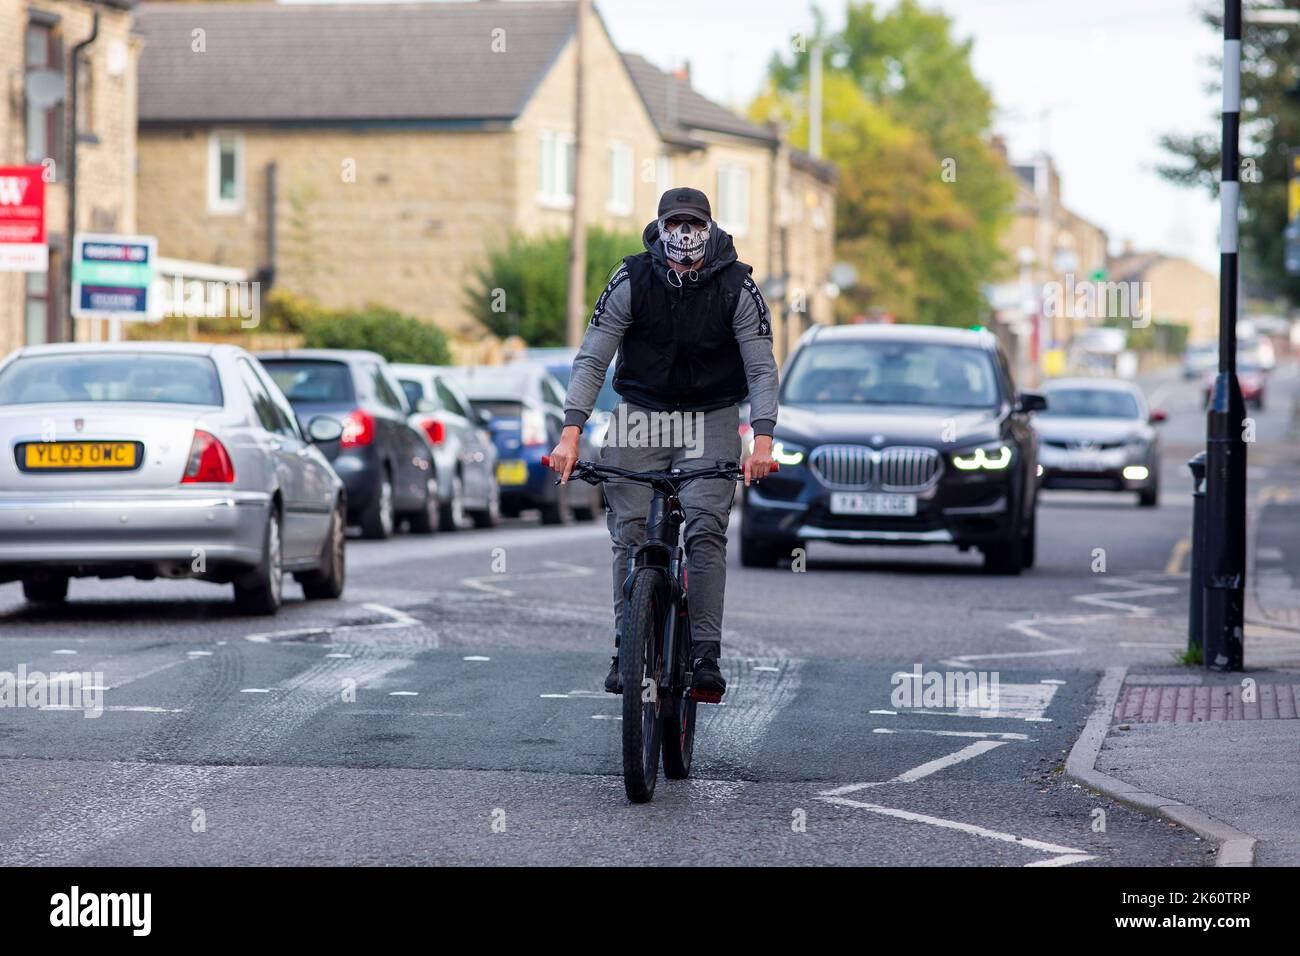 A young man on a mountain bike wearing a skeleton face mask to disguise his appearance and no helmet down the main street of Wyke, Bradford, West Yorkshire, UKCredit: Windmill Images/Alamy Live News Stock Photo